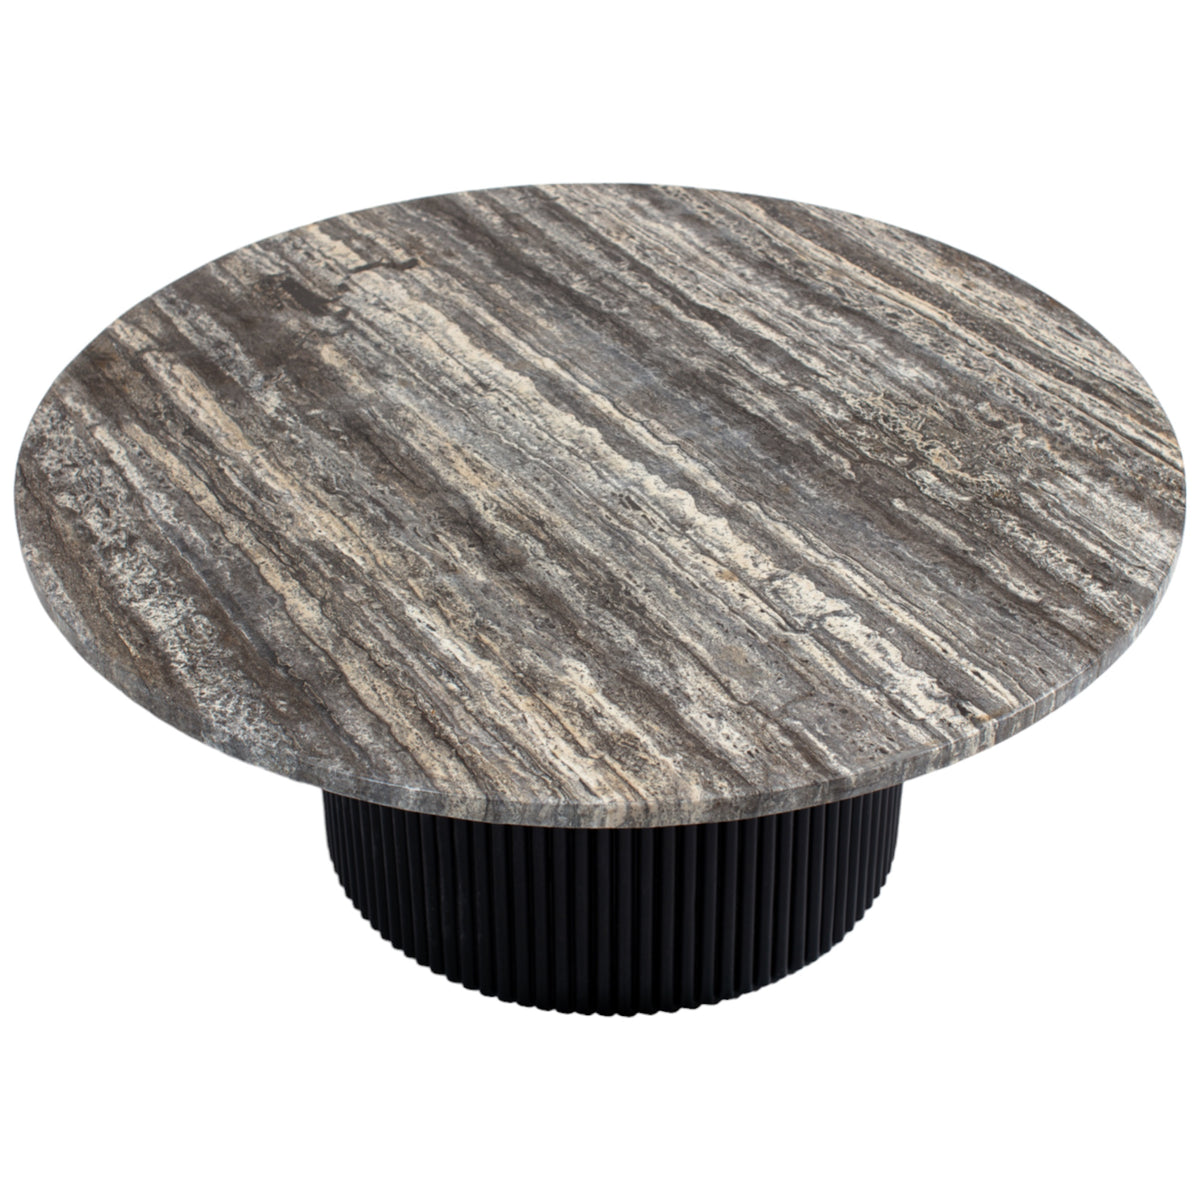 HAND MADE NORDIC BLACK FLUTED GREY TRAVERTINE MARBLE COFFEE TABLE